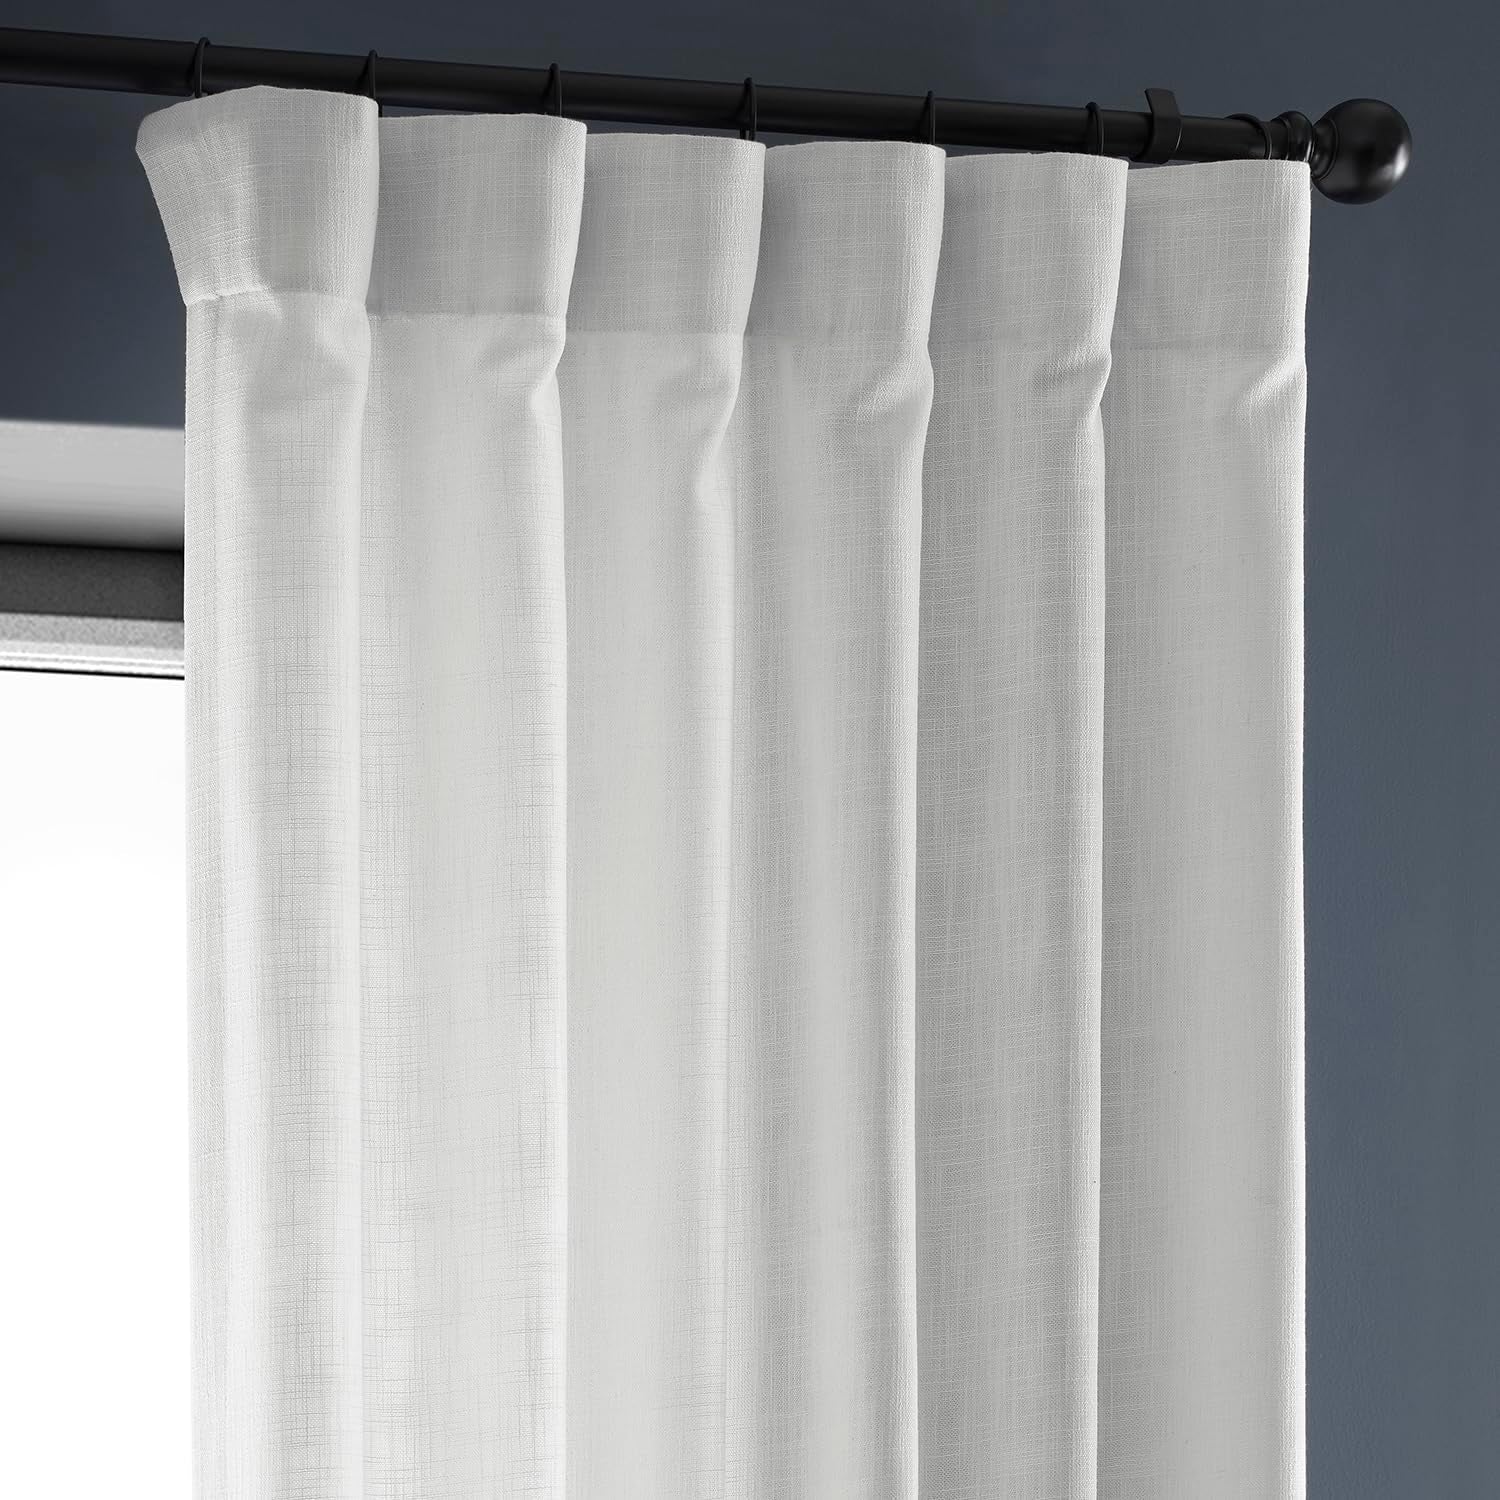 HPD Half Price Drapes Semi Sheer Faux Linen Curtains for Bedroom 96 Inches Long Light Filtering Living Room Window Curtain (1 Panel), 50W X 96L, Rice White  EFF   